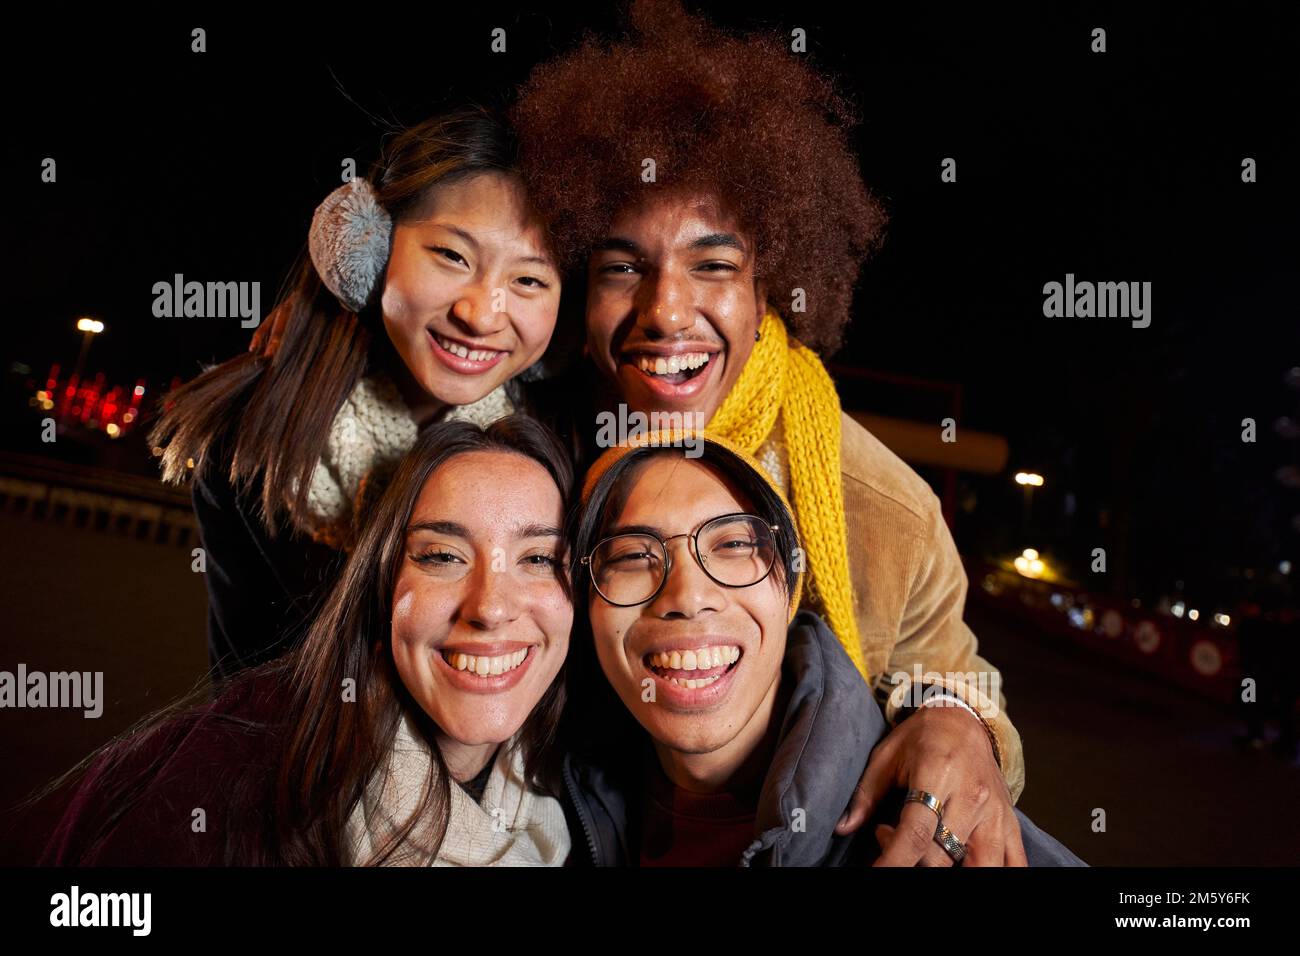 Selfie of a group of happy people taking selfie photo in the night with a phone in winter clothes. Stock Photo